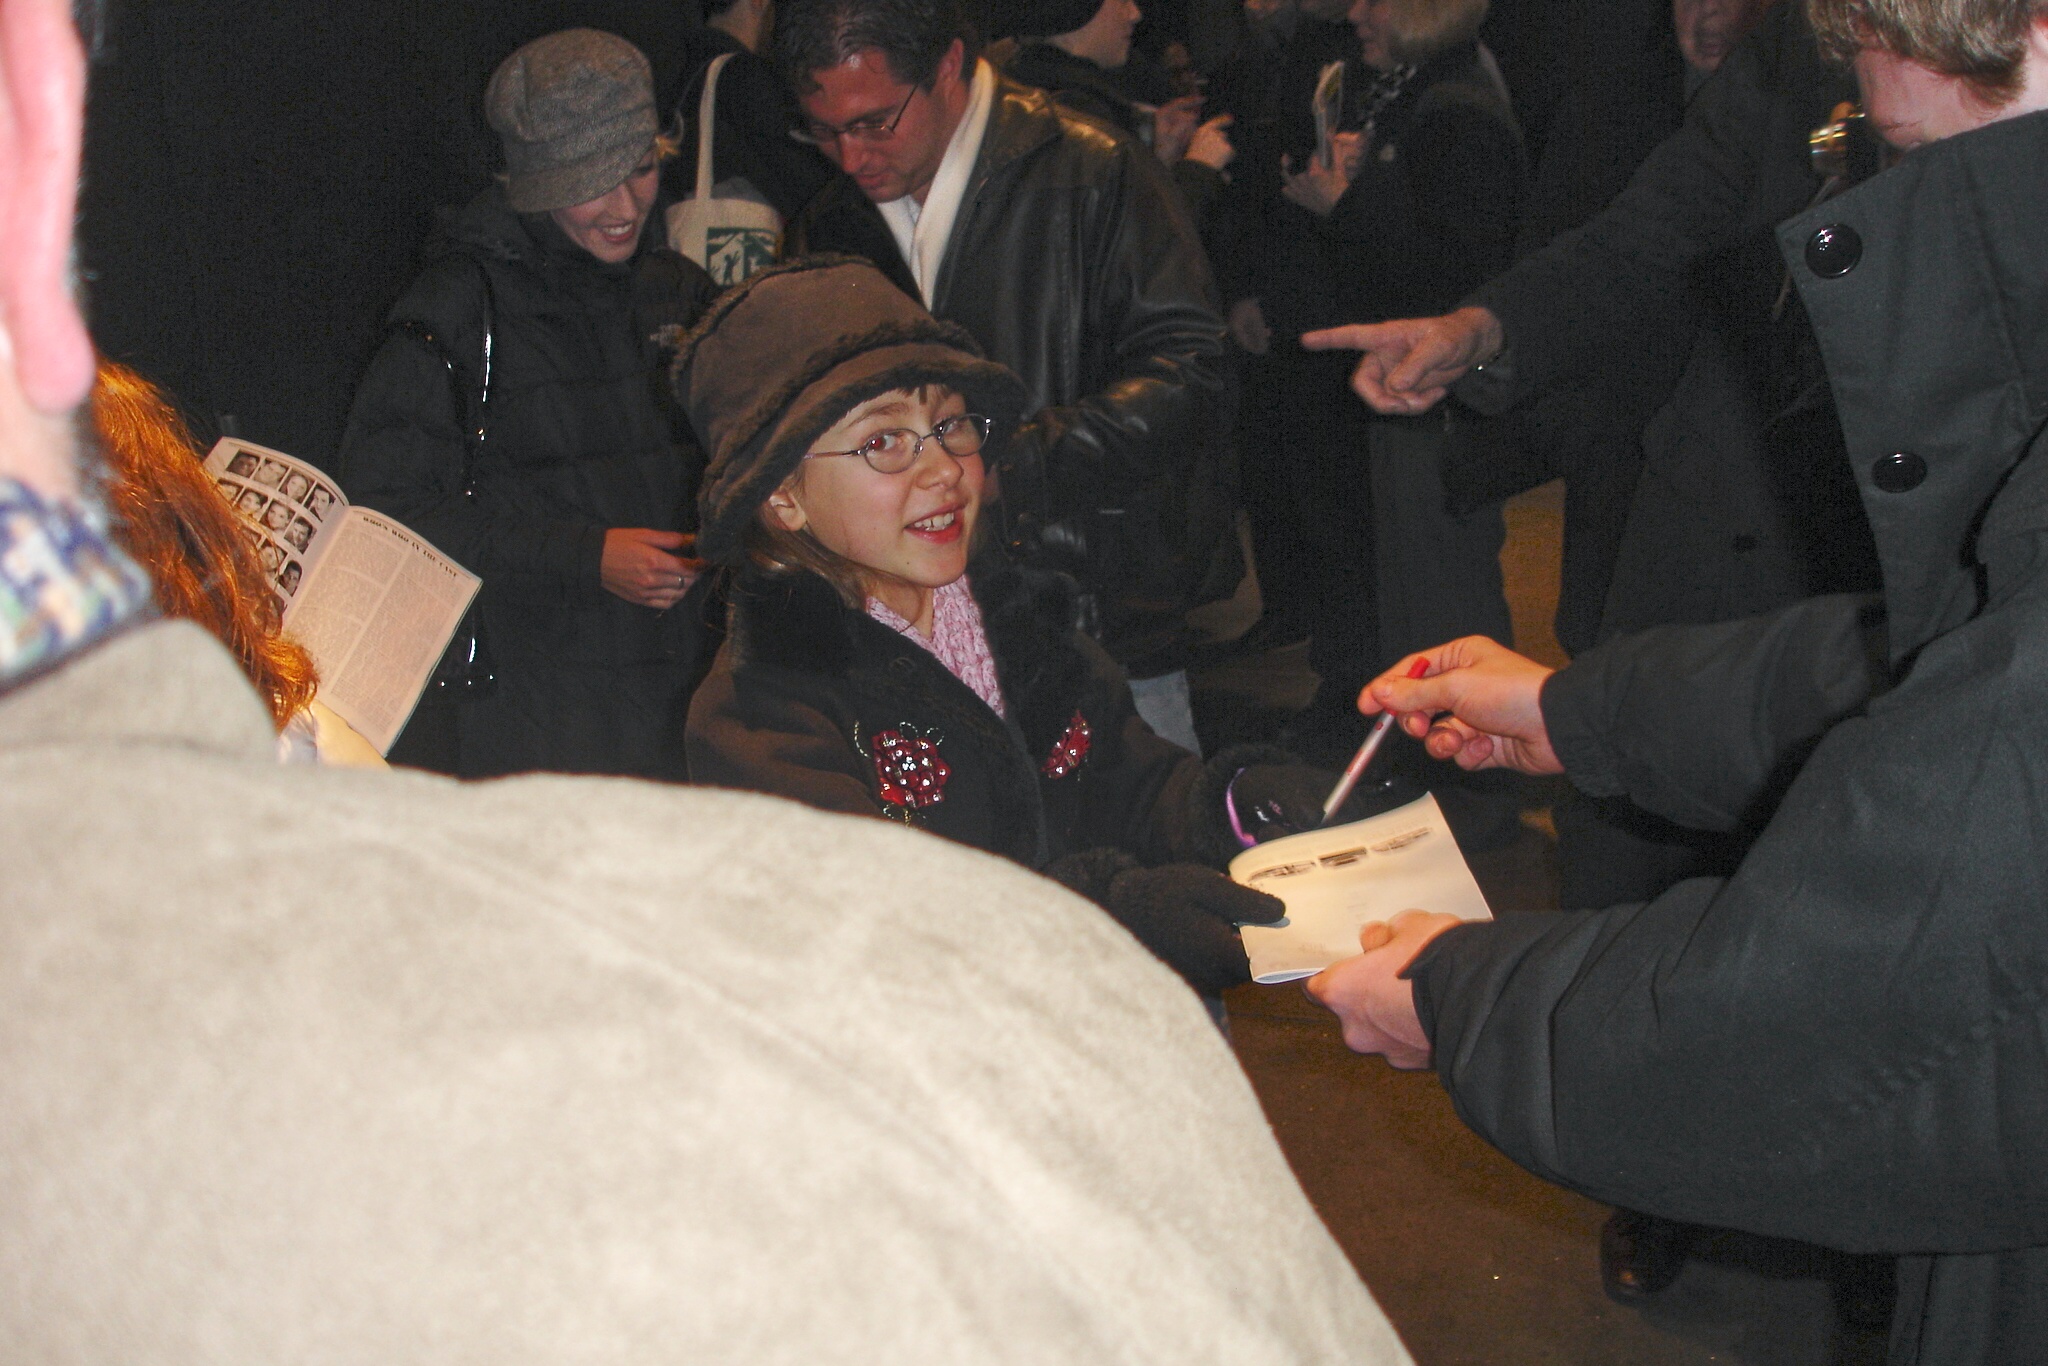 signing autographs at the Broadway Marriott Marquis stage door.